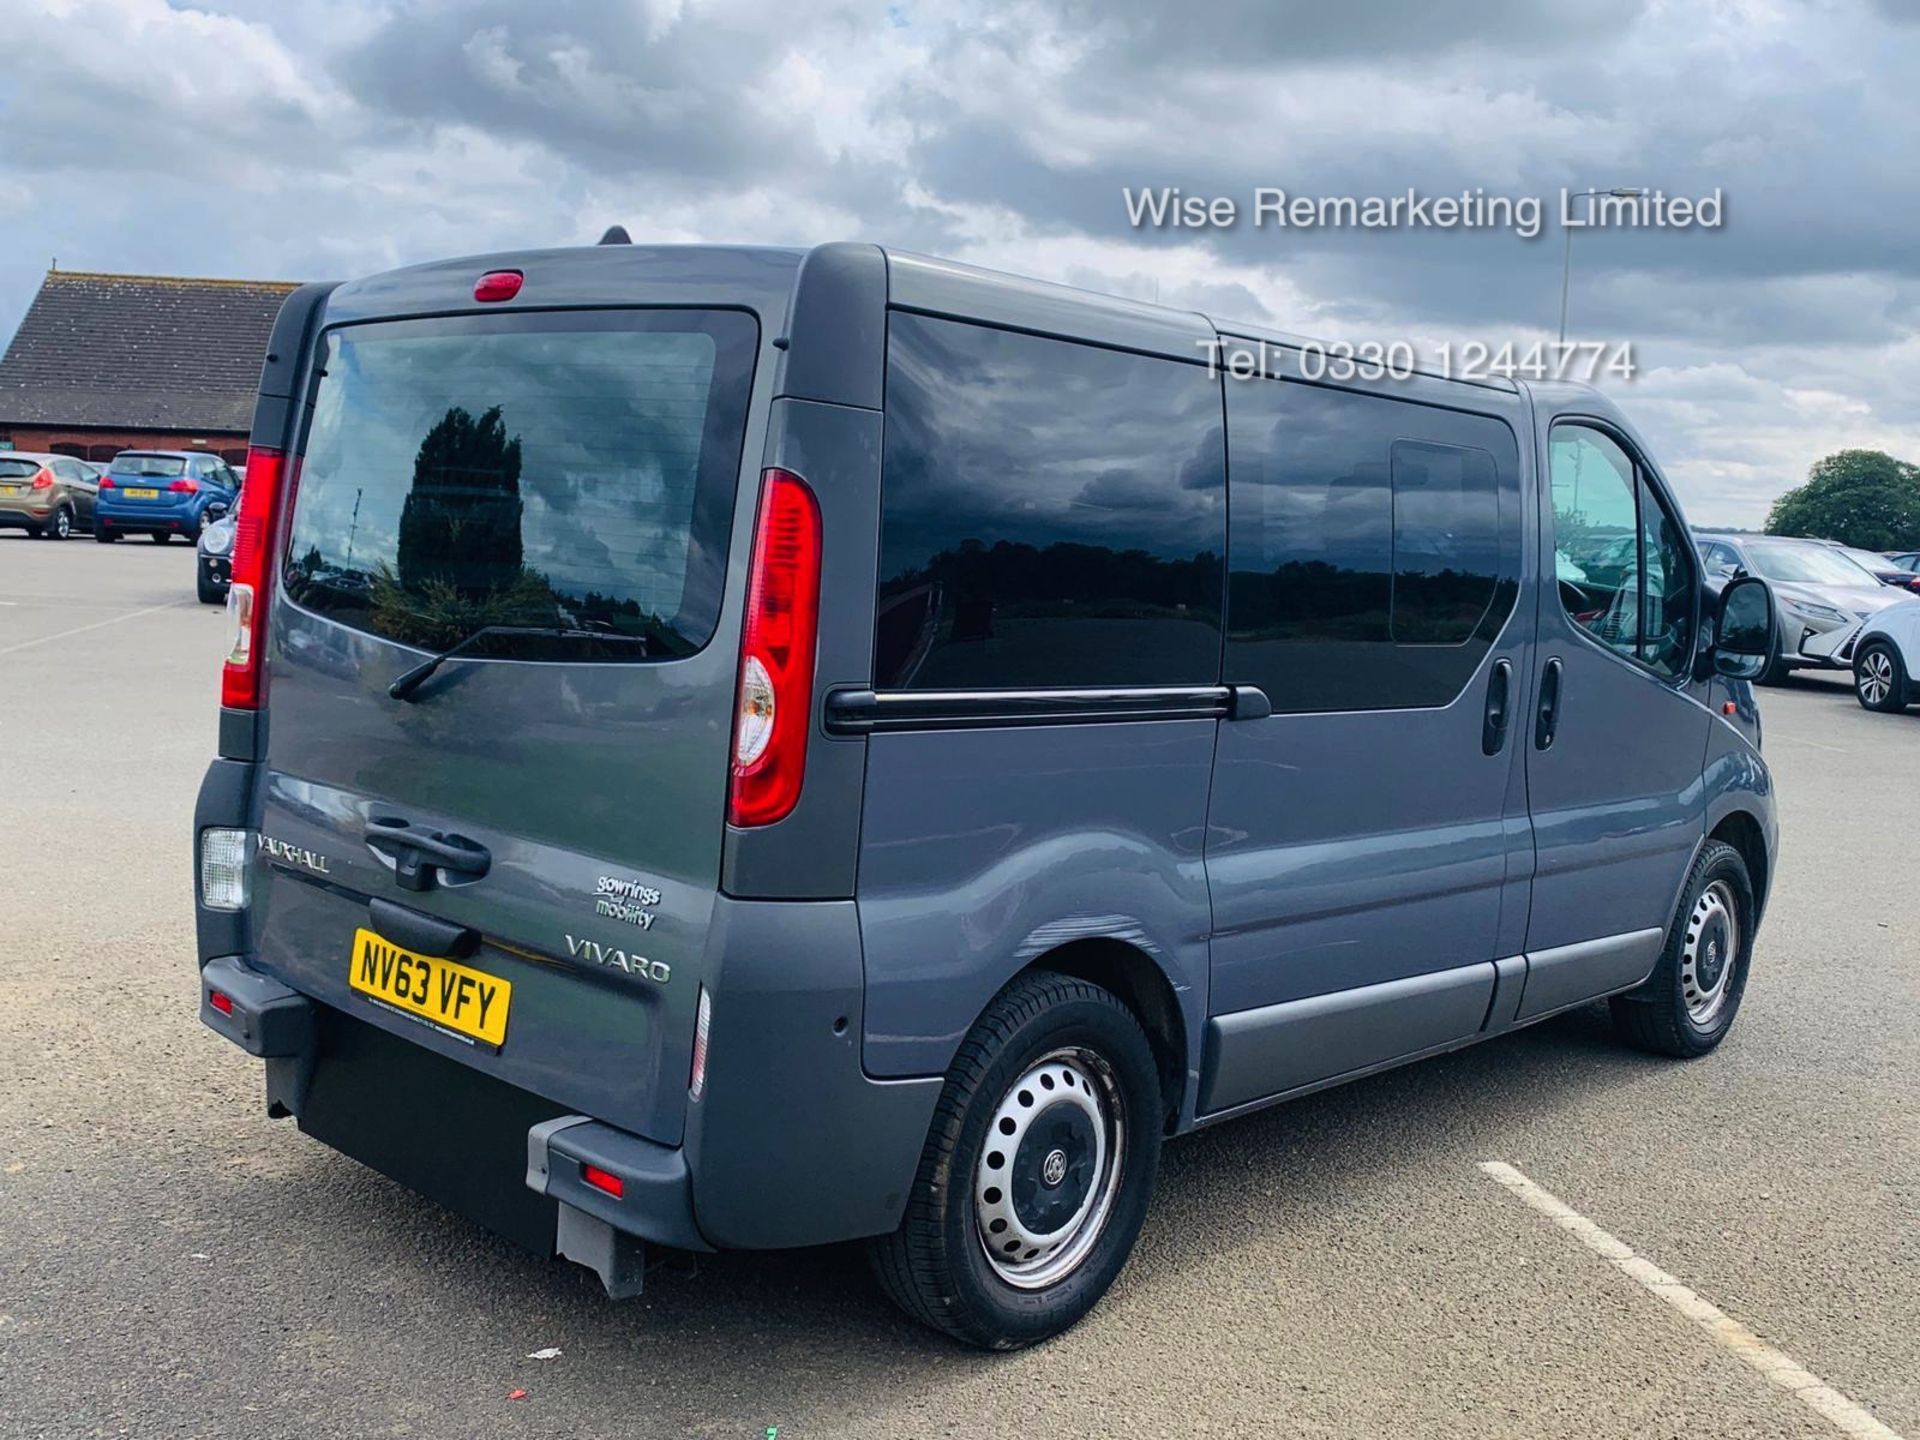 Vauxhall Vivaro 2.0 CDTI 2900 Minibus - 2014 Model - Wheel Chair Access -1 Owner From New -History - Image 7 of 21